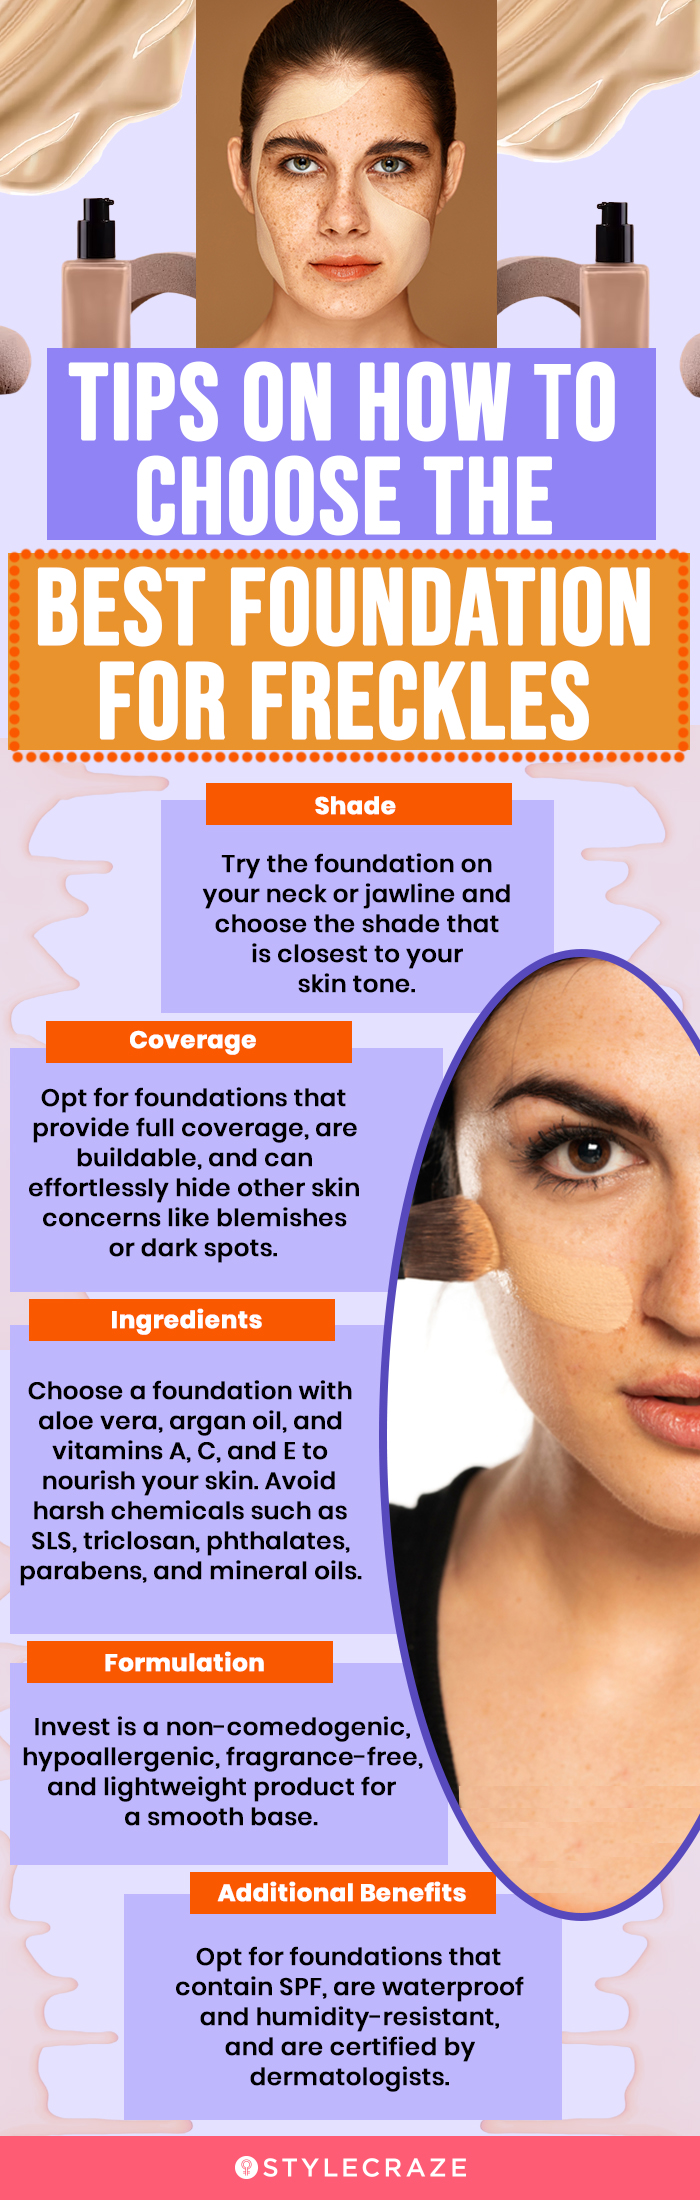 Tips On How To Choose The Best Foundation For Freckles (infographic)